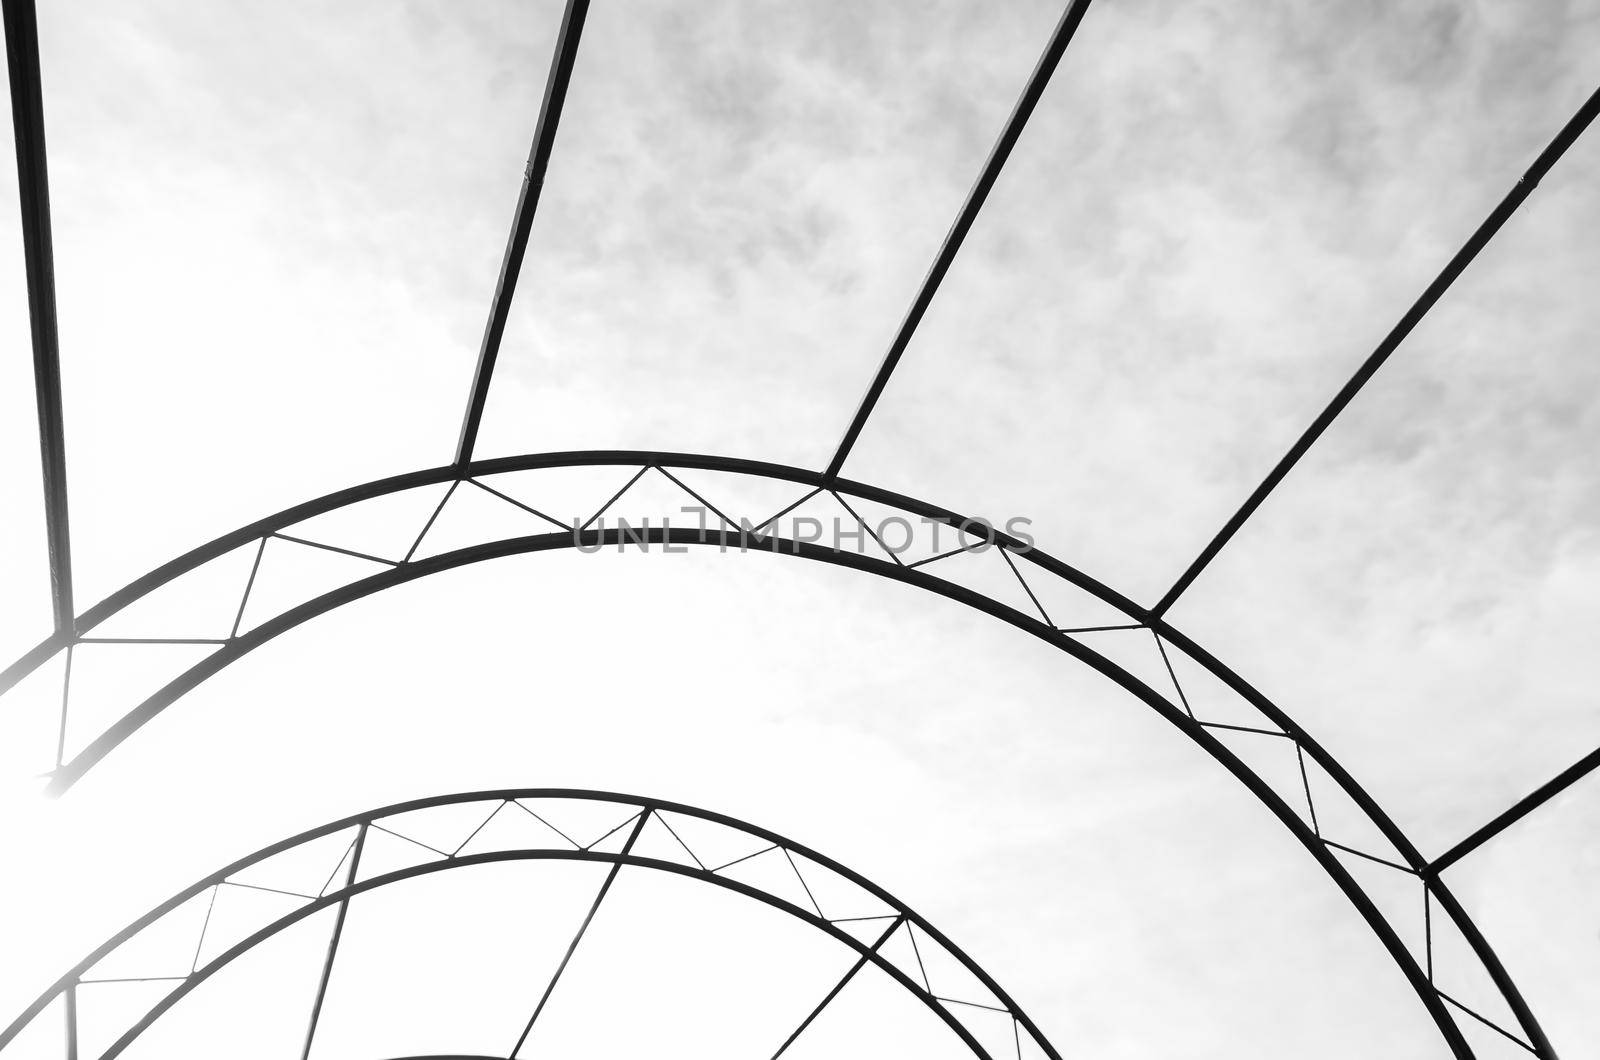 Arc metal structure on a sky background abstraction . Architecture, decorative elements. Constructive trusses.